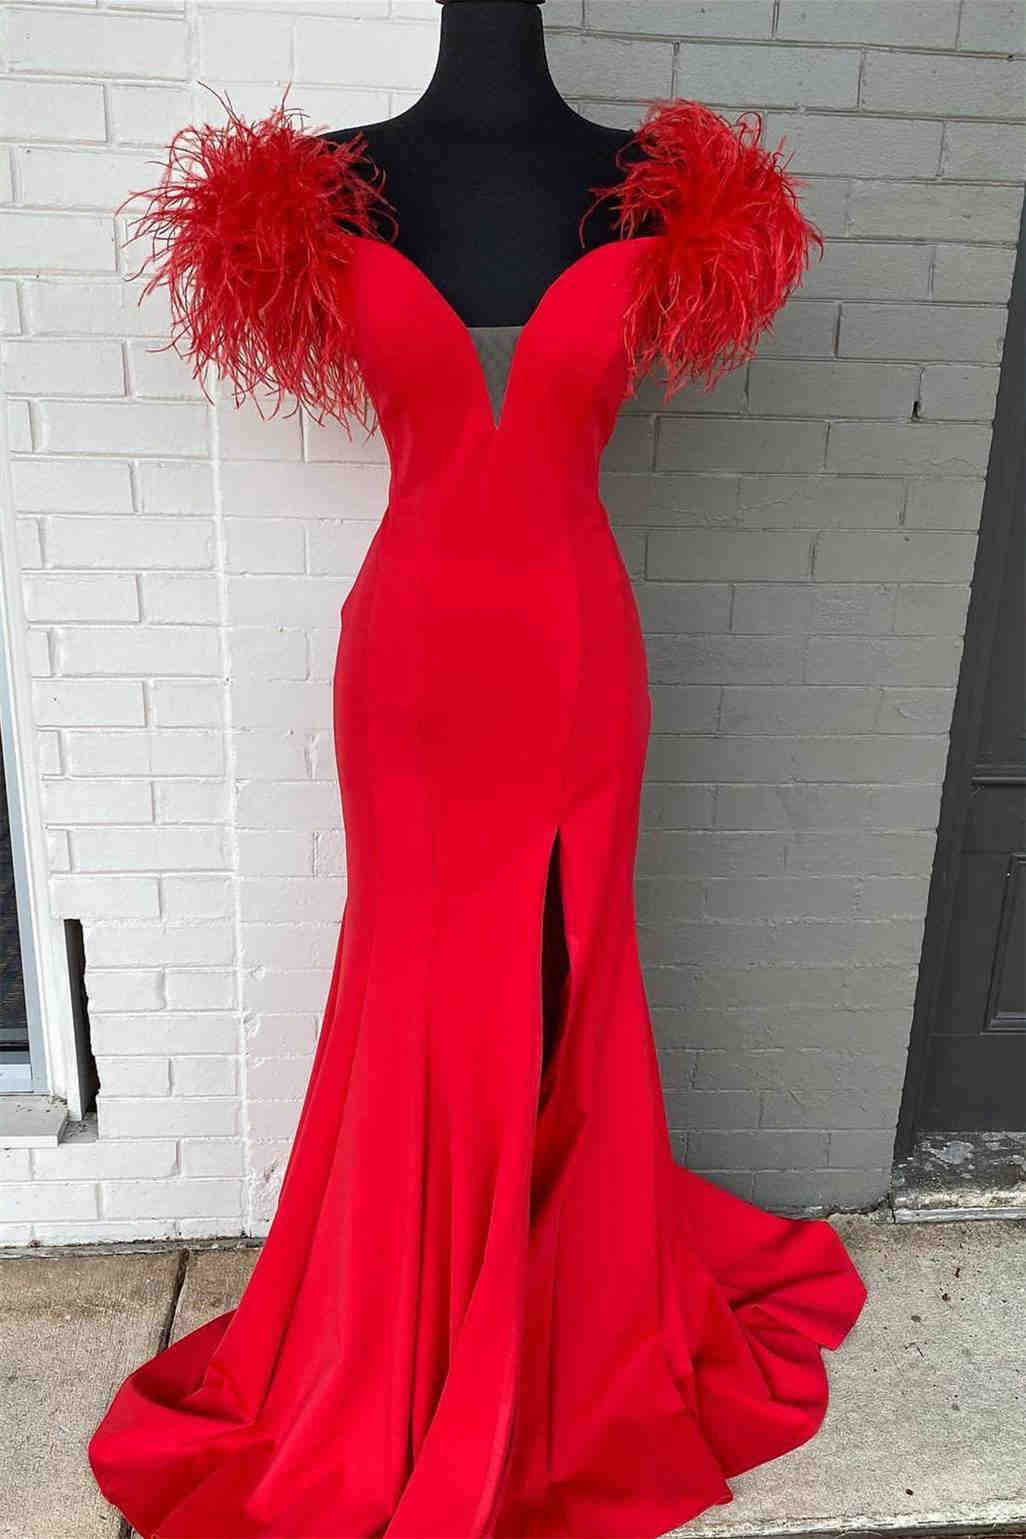 Plunging V-Neck Off the Shoulder Feathered Red Long Party Dress nv971